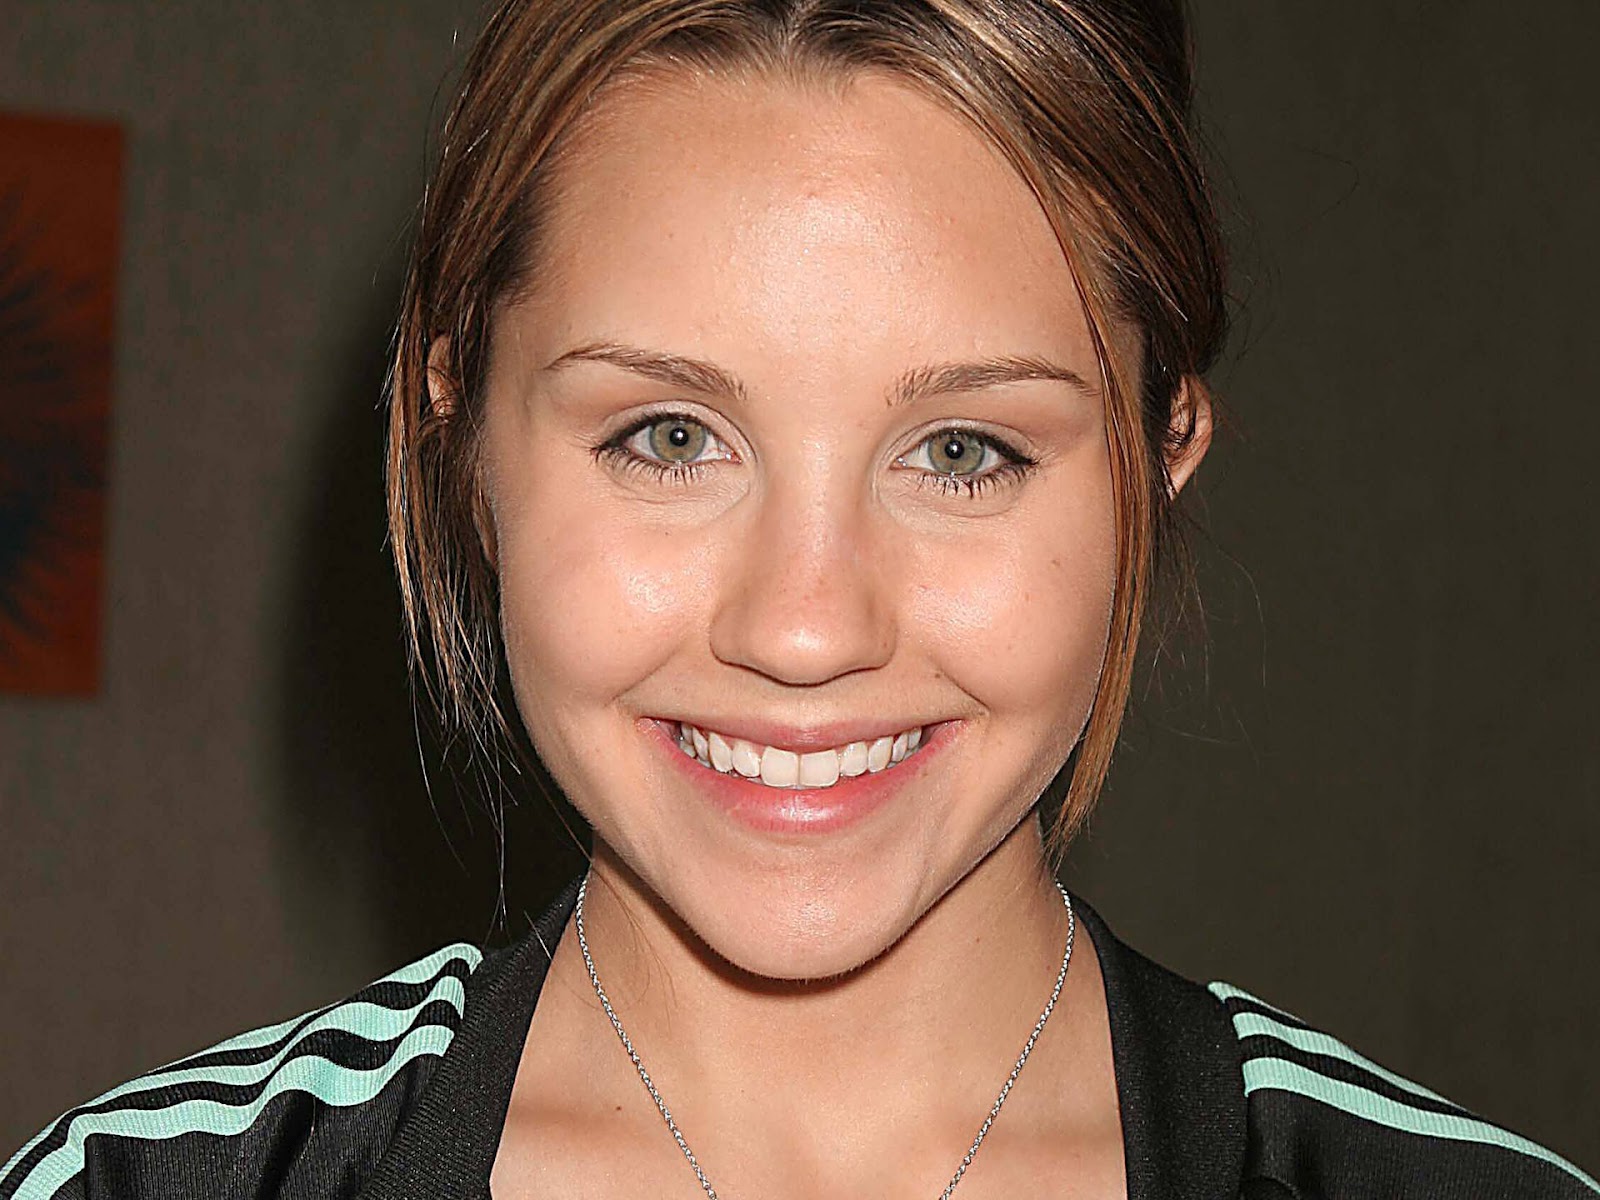 The celeb without make-up